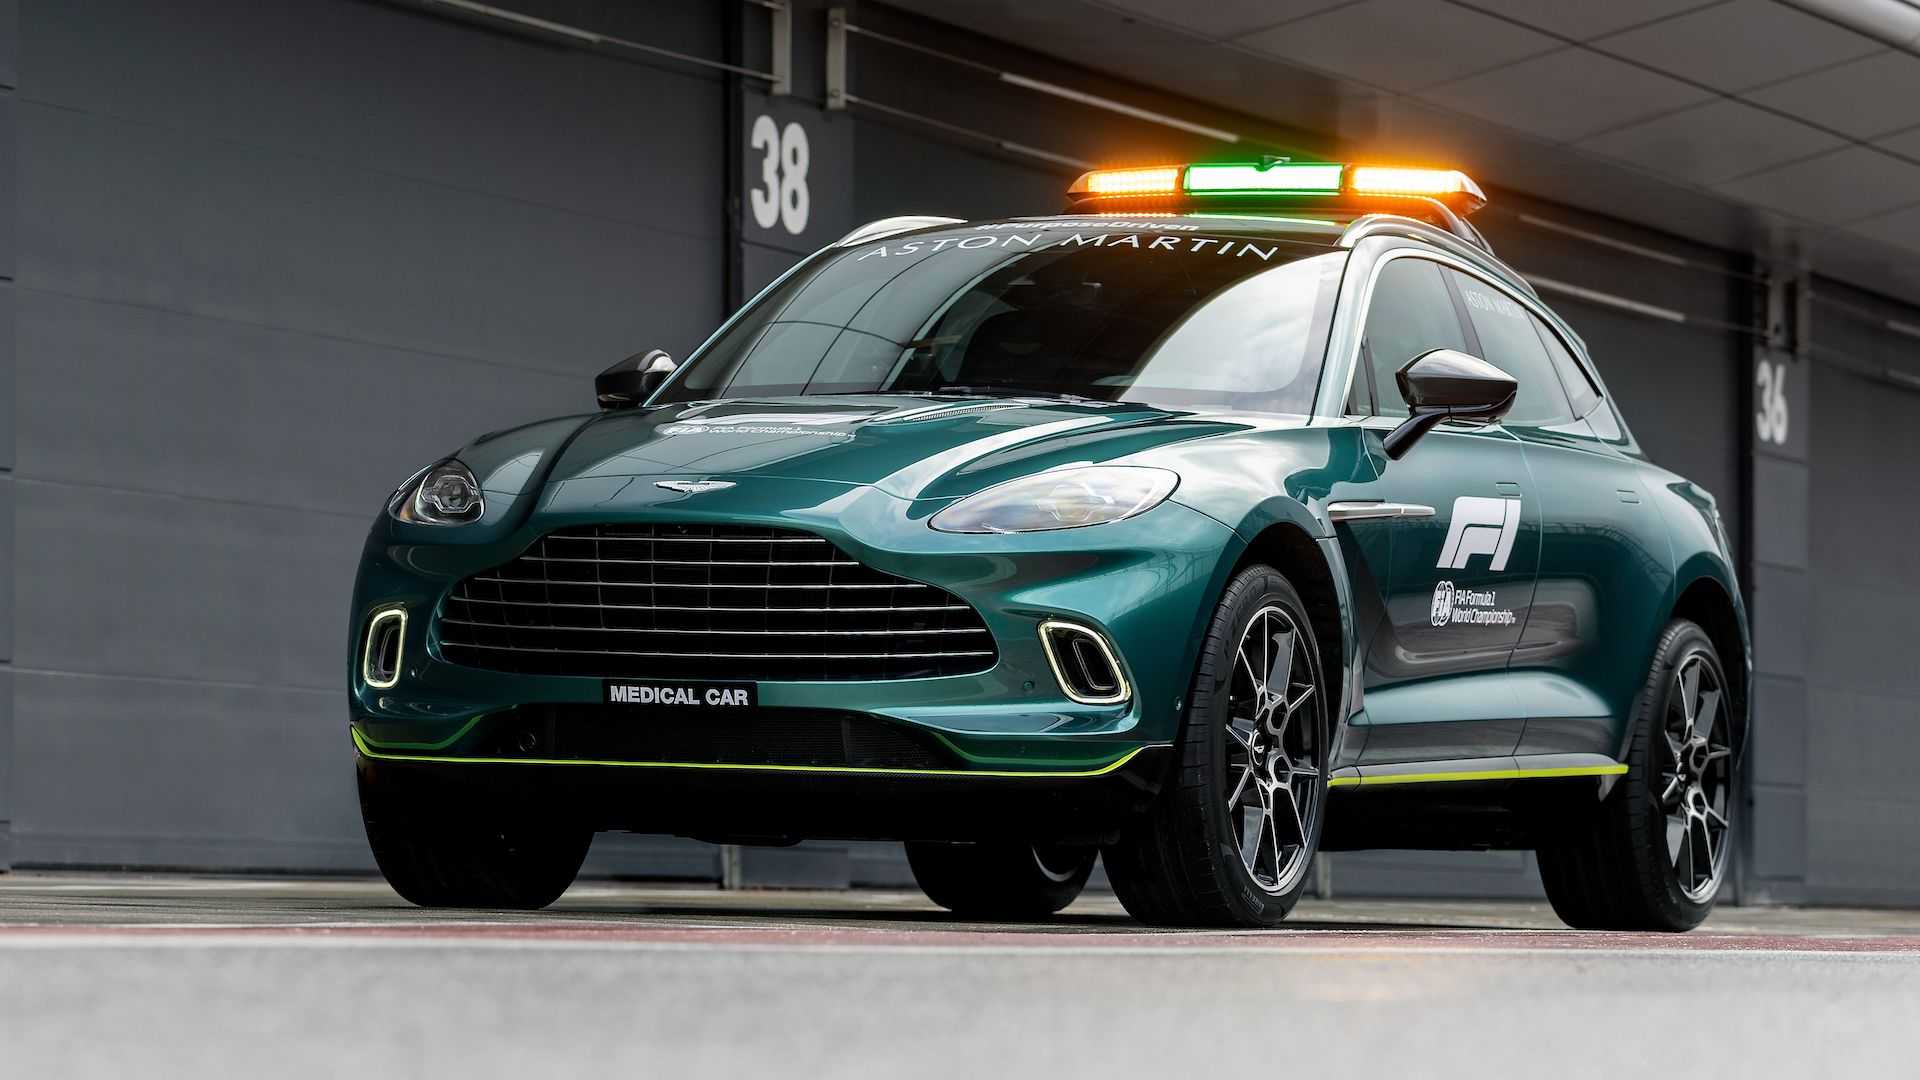 For The First Time Ever, Aston Martin Is The FIA Formula One World